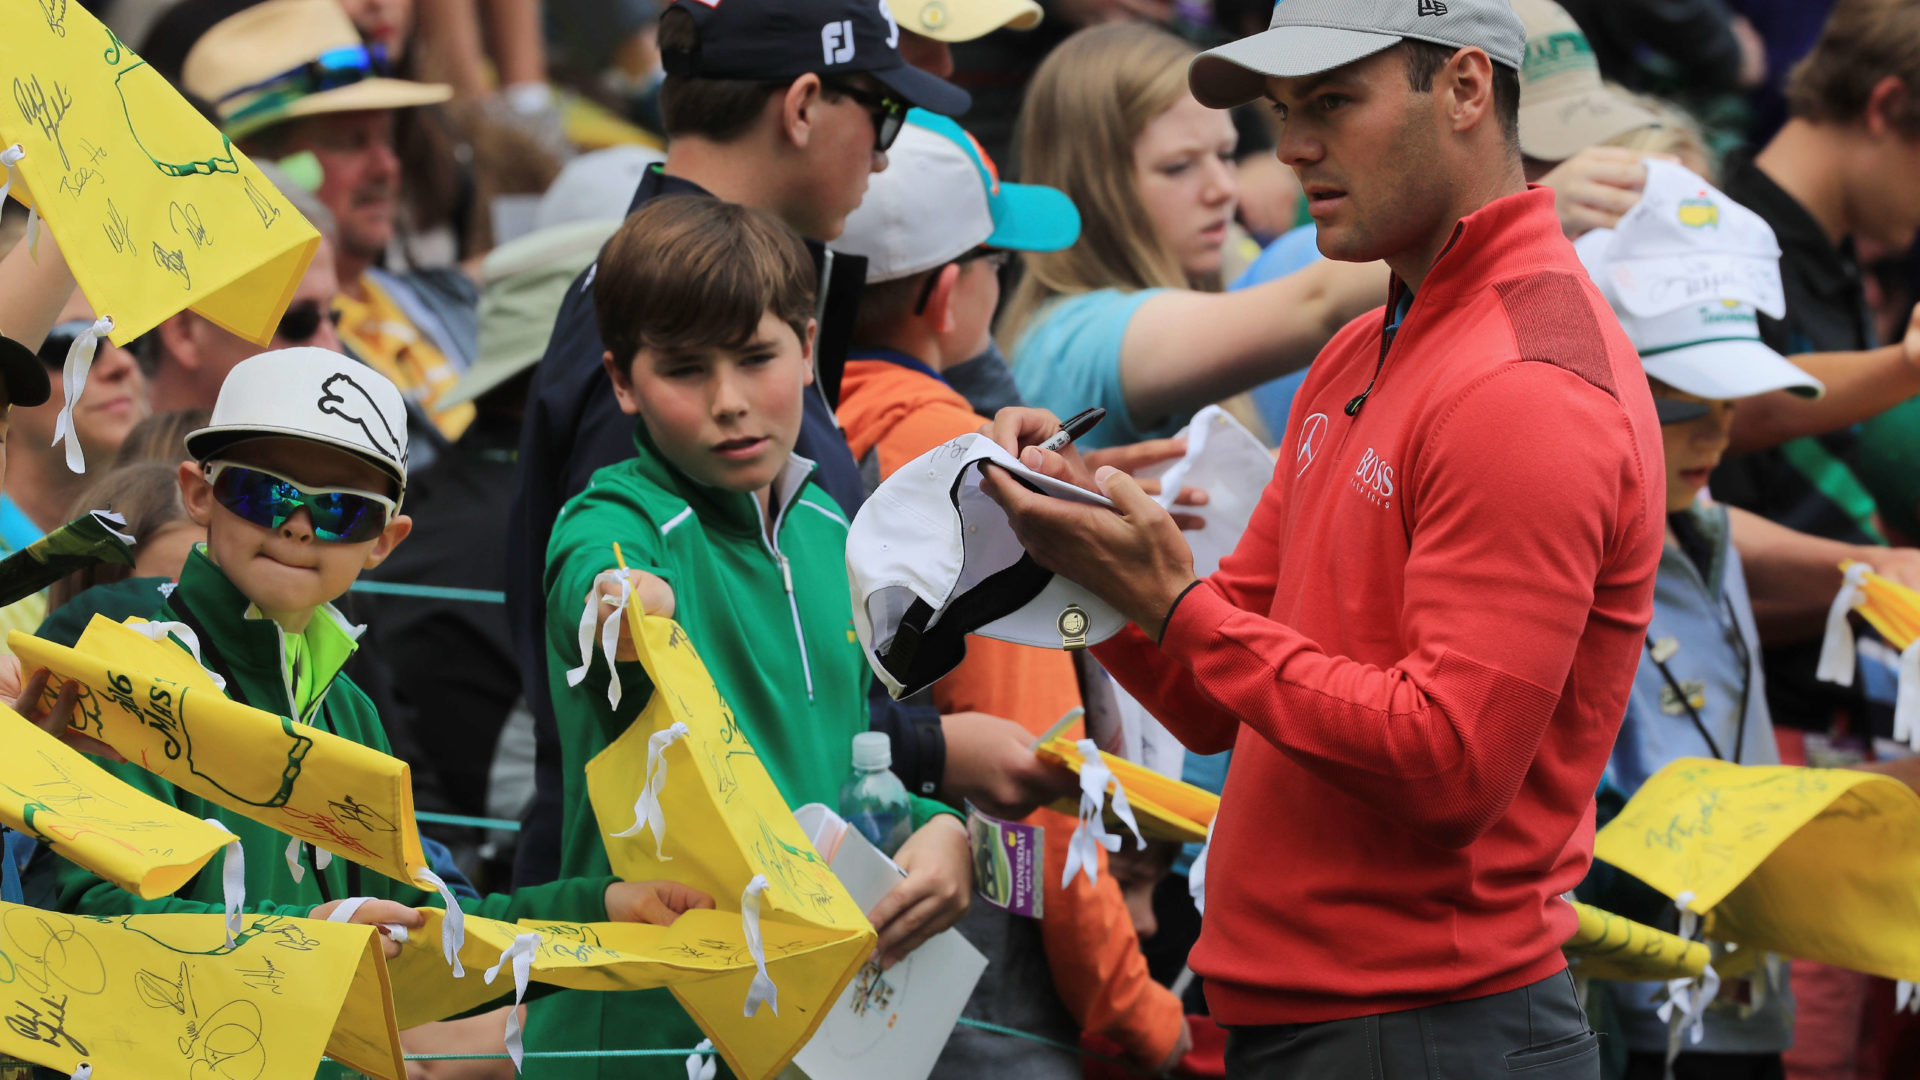 AUGUSTA, GA - APRIL 06: Martin Kaymer of Germany signs autographs during a practice round prior to the start of the 2016 Masters Tournament at the Augusta National Golf Club on April 6, 2016 in Augusta, Georgia. (Photo by Scott Halleran/Getty Images for Golfweek)